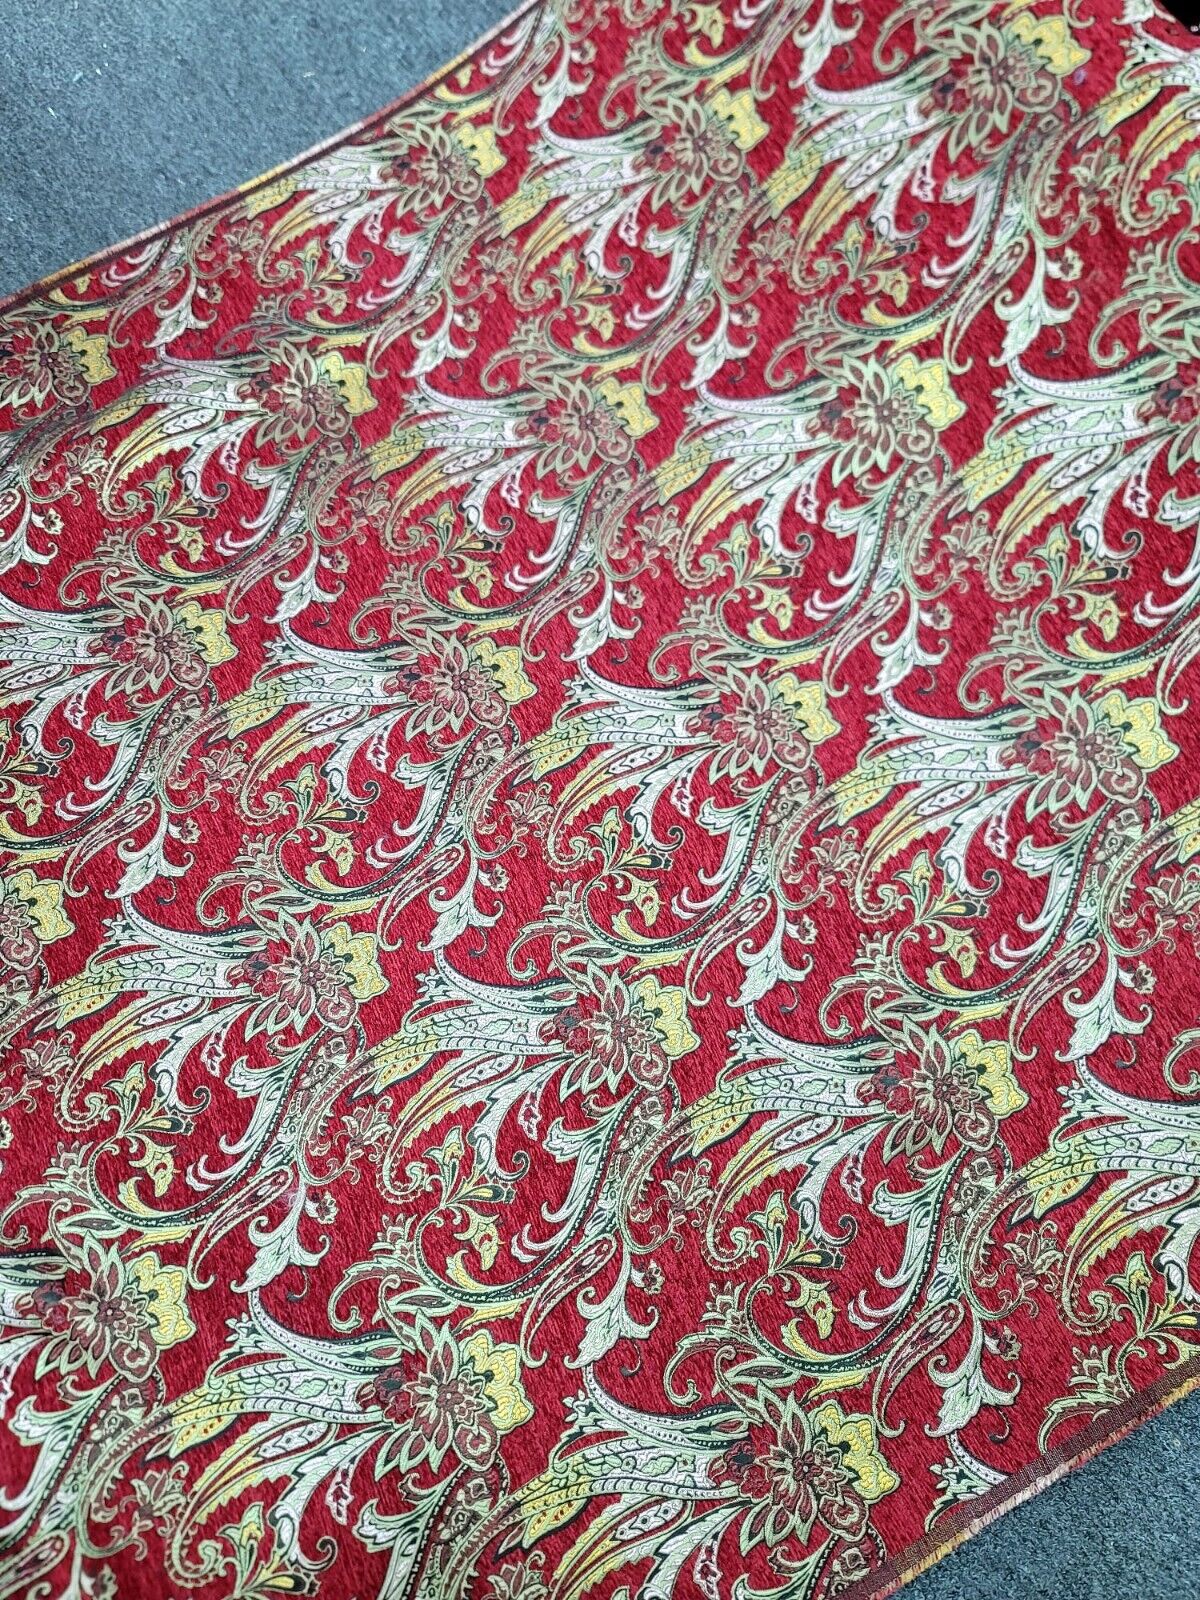 Red Gold Floral Damask Brocade Fabric - 60” Width - Sold By The Yard - Chenille